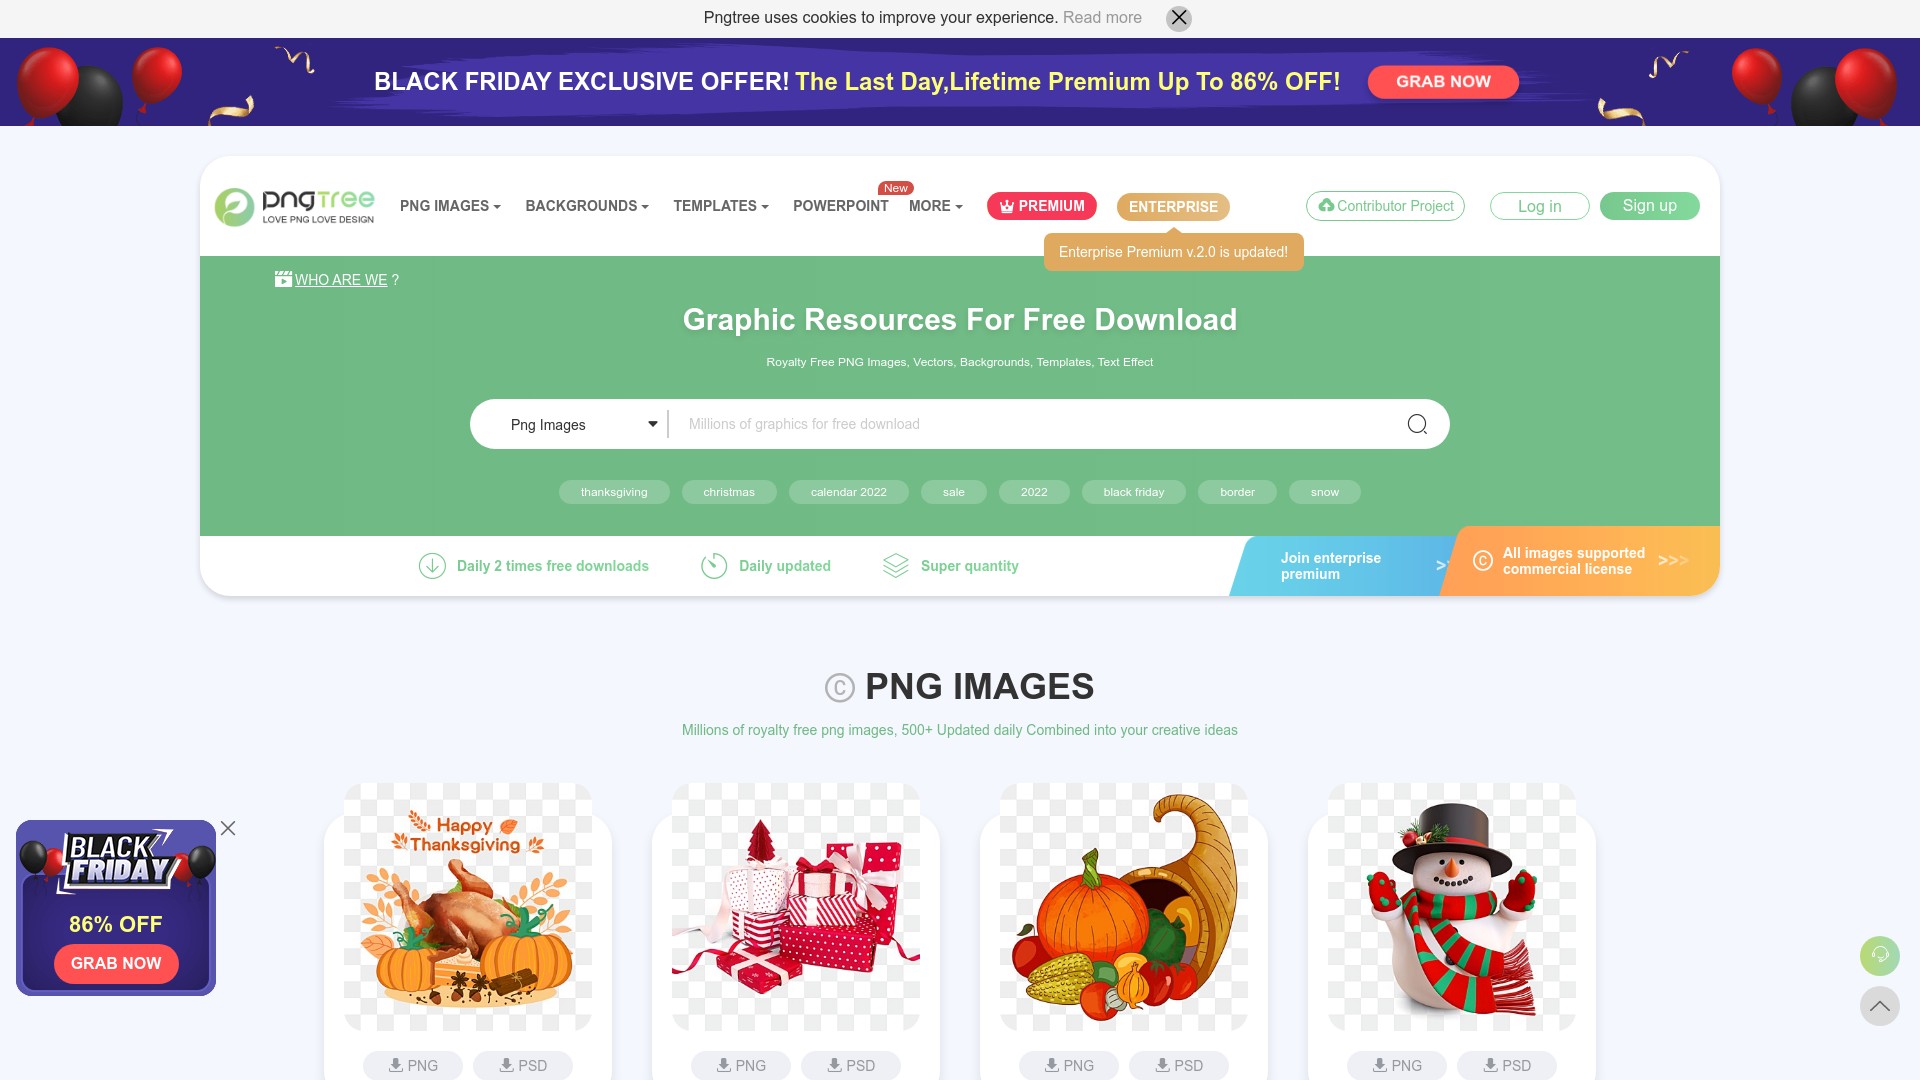 Pngtree provides free download of png, png images, backgrounds and vector. Millions of high quality free png images, PSD, AI and EPS Files are available.